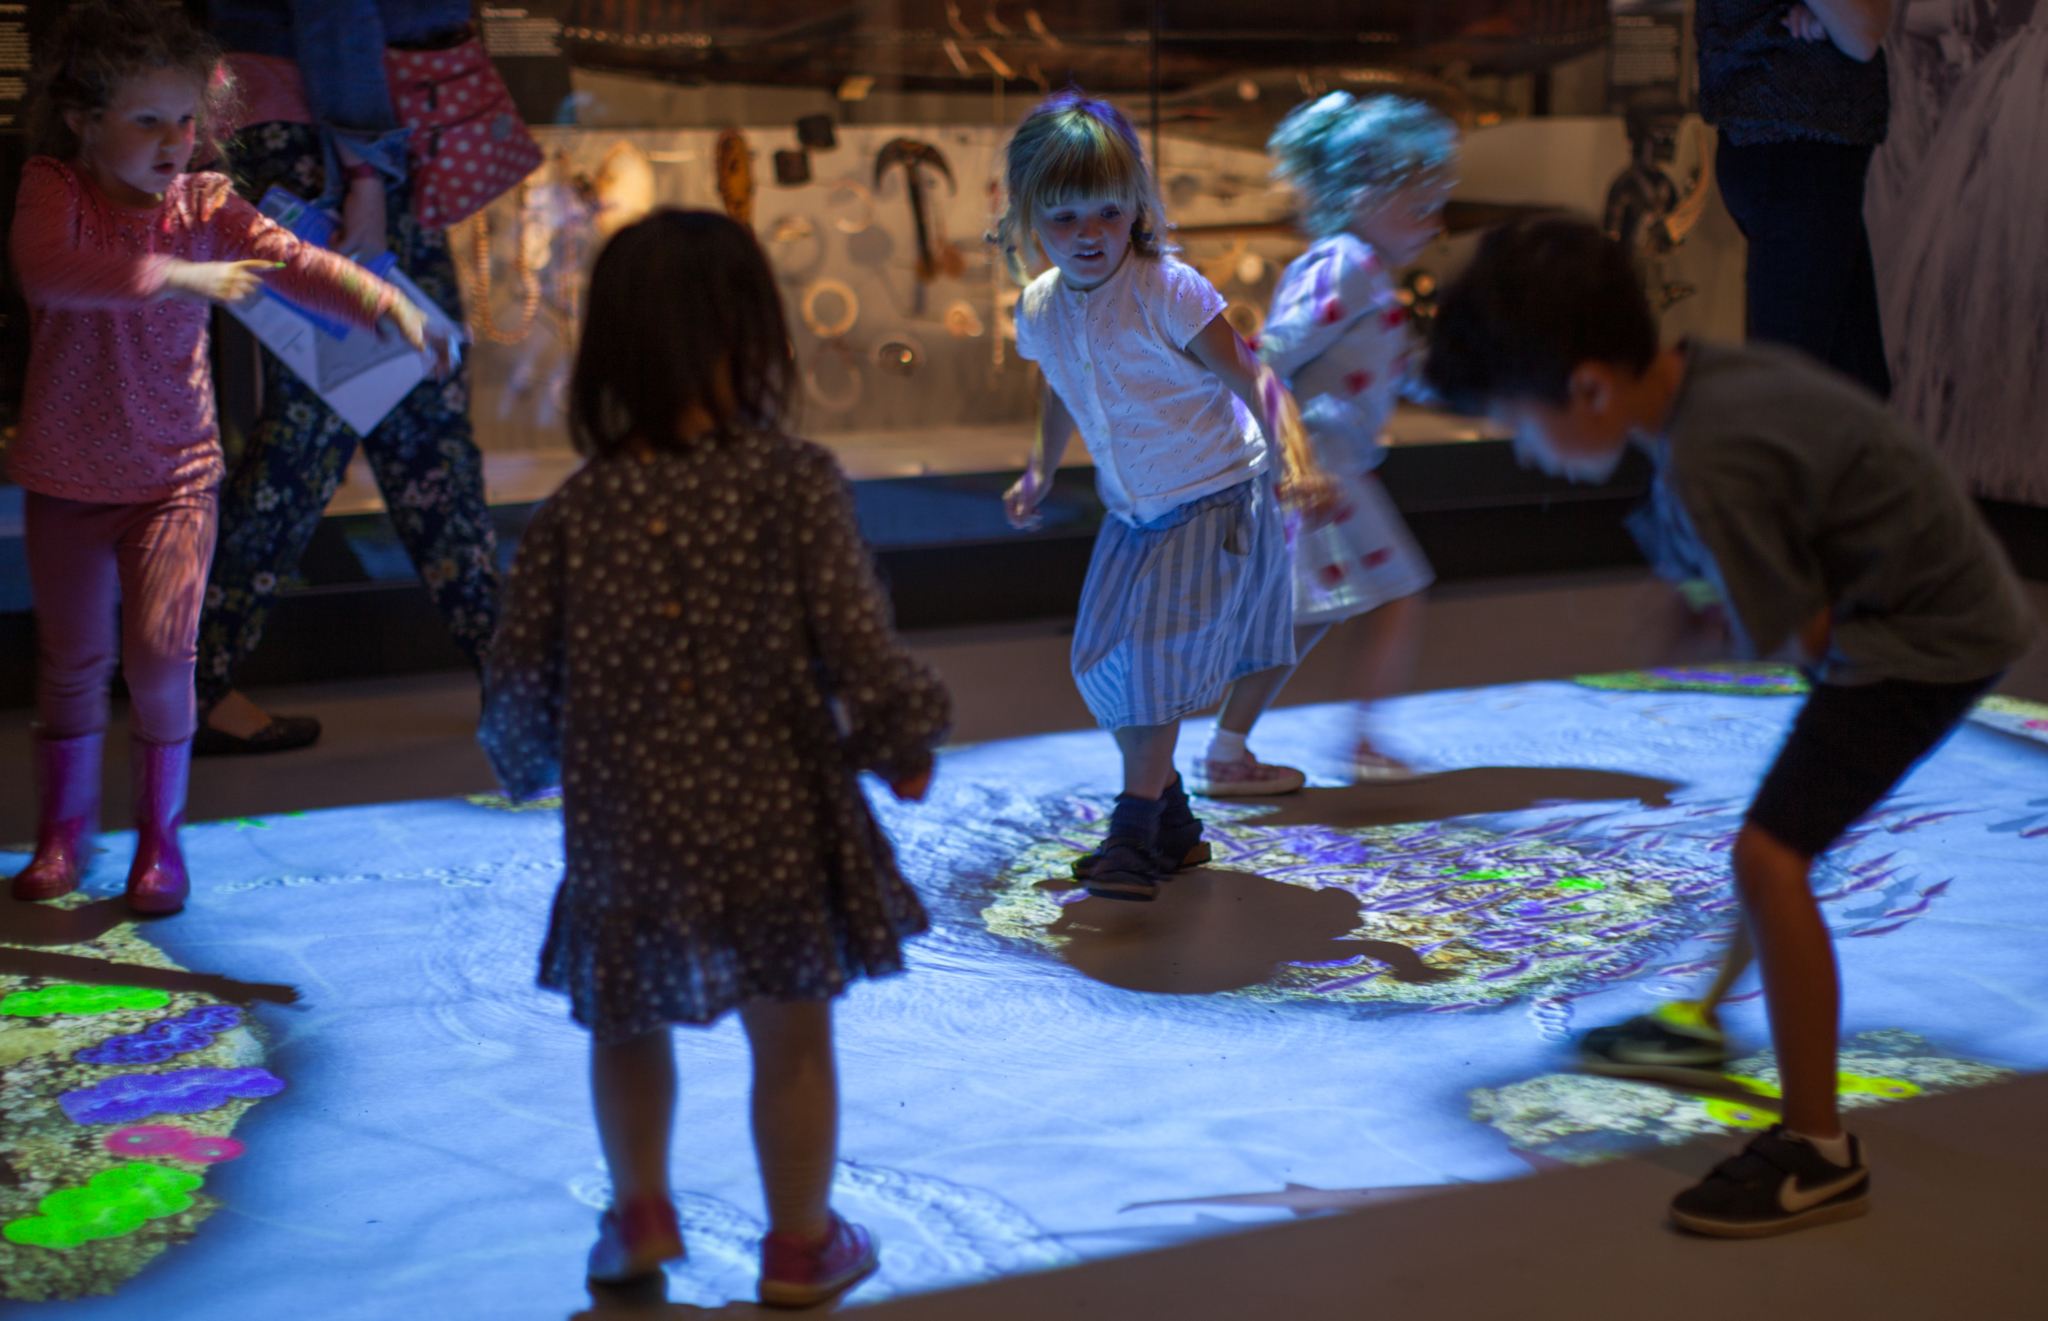 Children playing with an interactive floor projection at the Horniman Museum